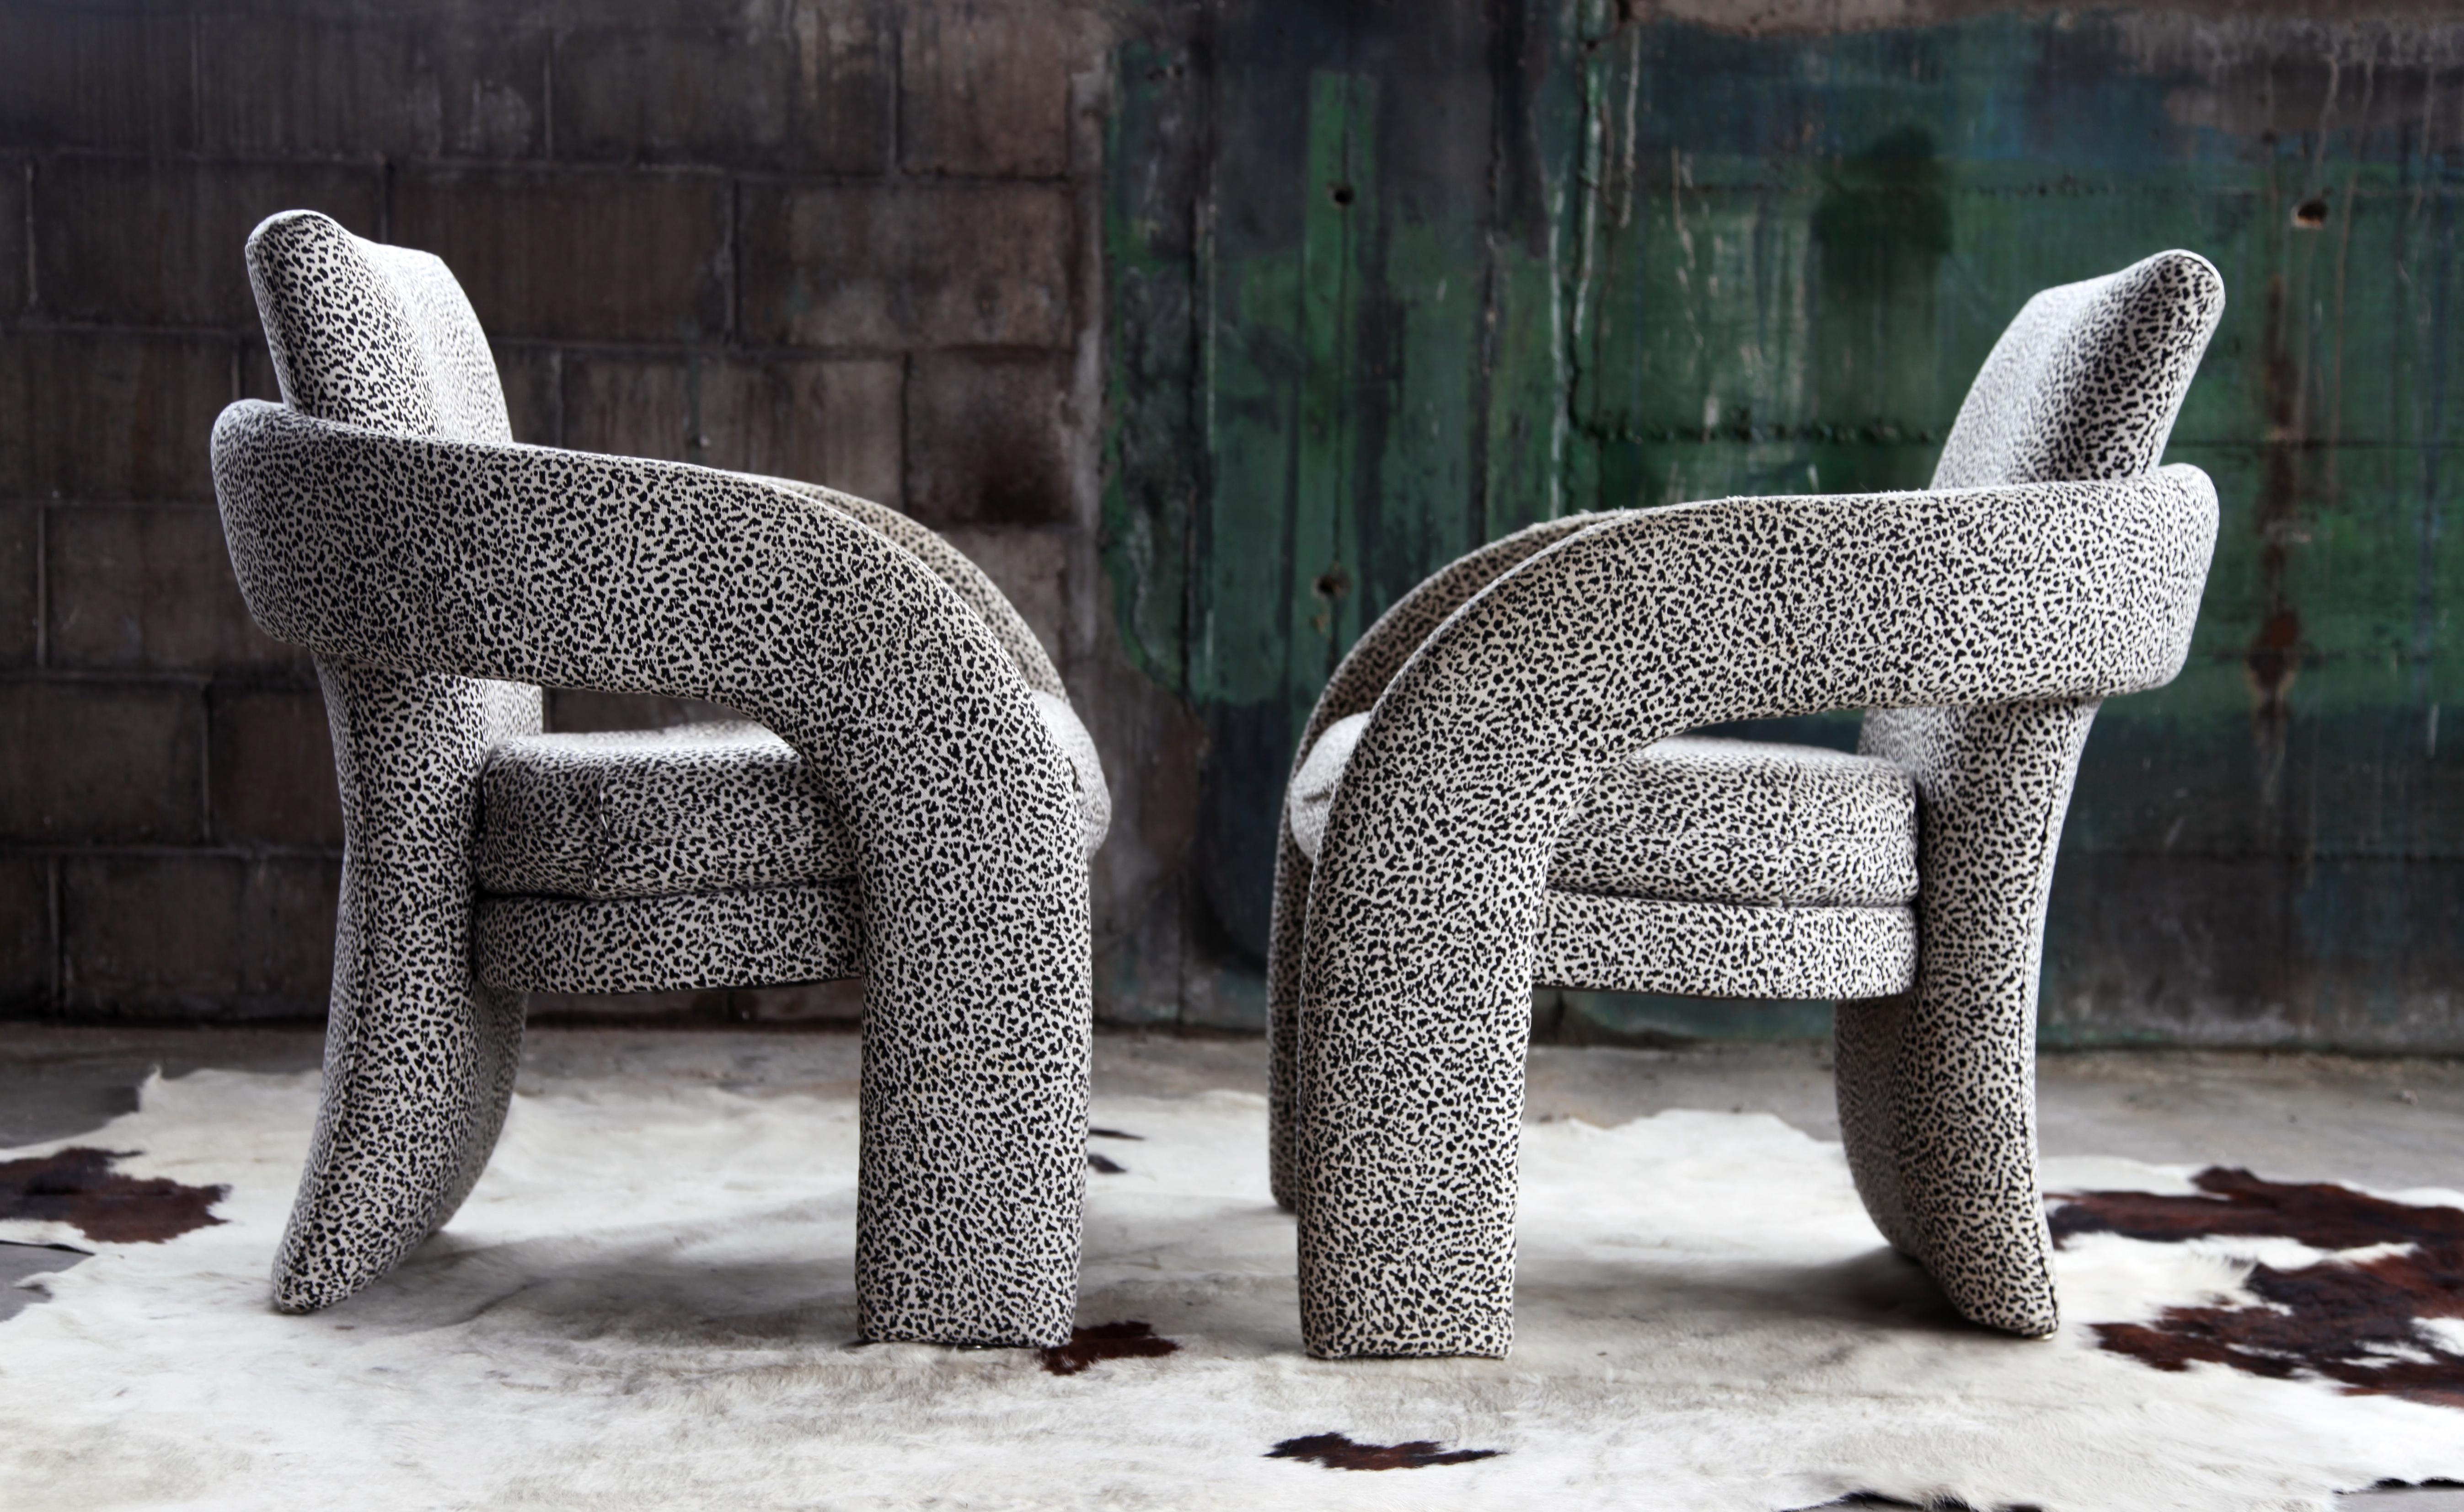 For sale here is a STUNNING unique designer Sculptural, vintage 80's / 90's Stylish pair of upholstered chairs.

This listing includes both chairs.

Acquired from one of the coolest, most eccentric collections we have come across ever. These chairs